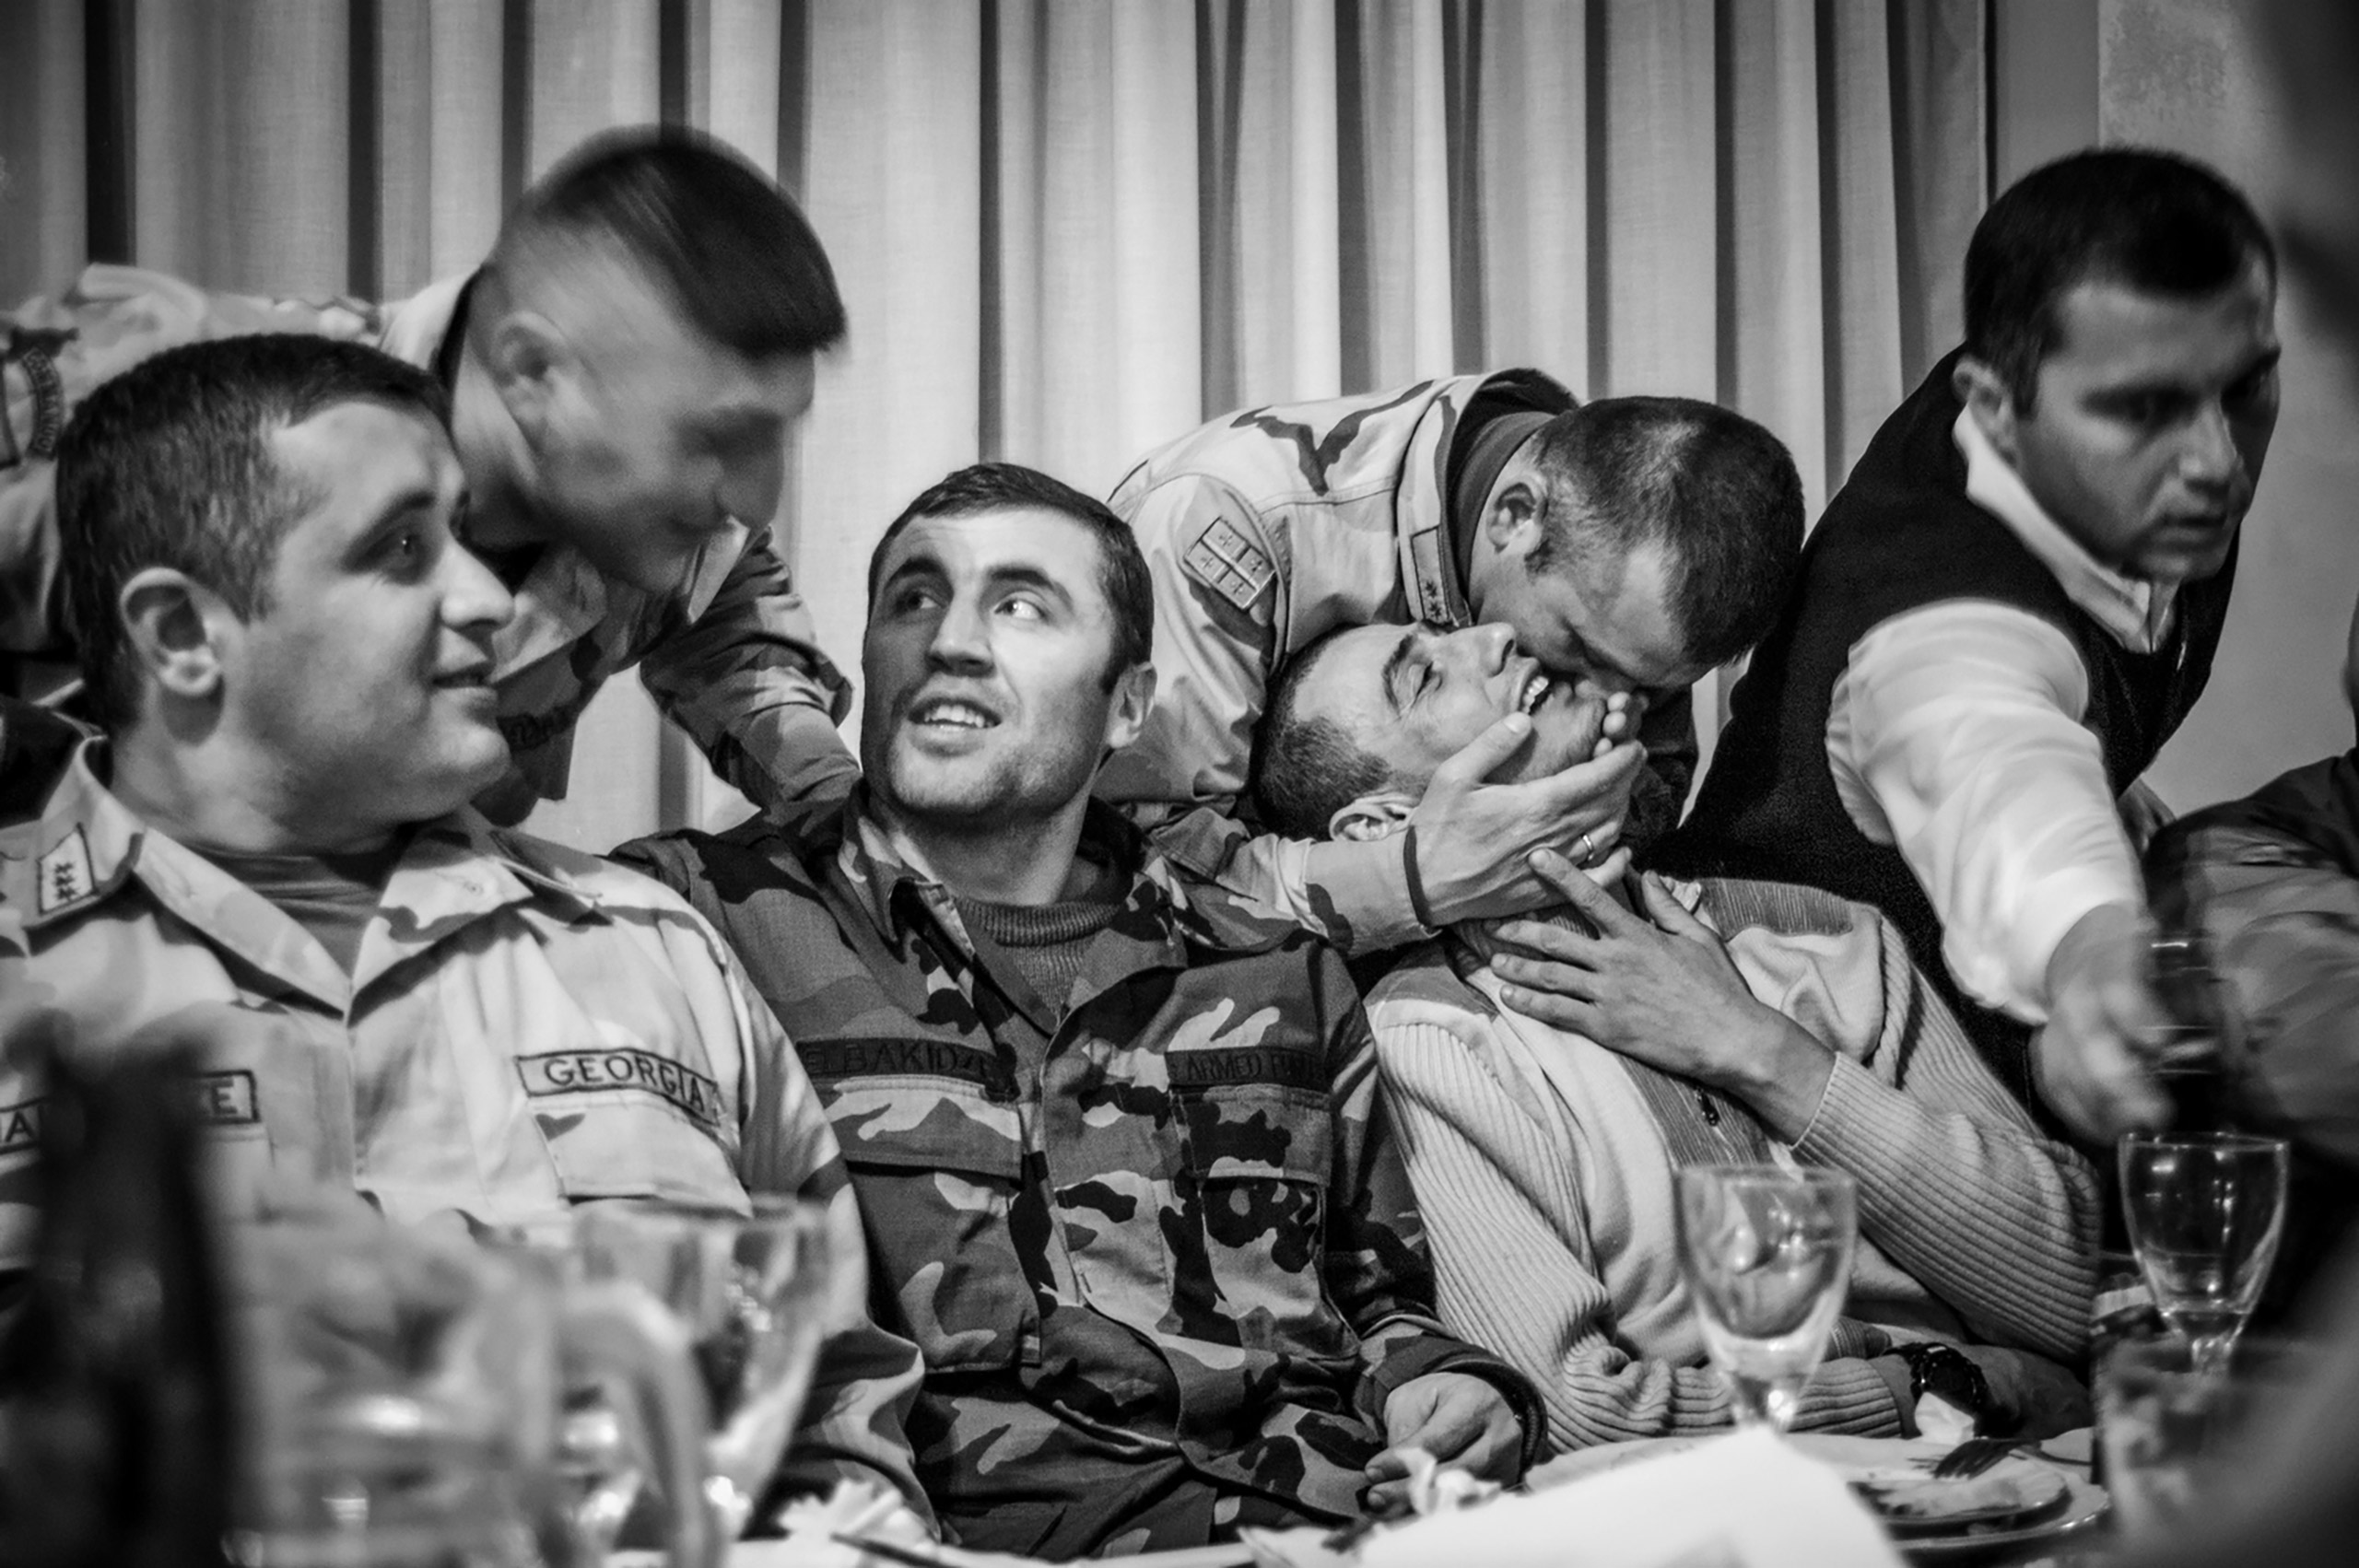 Farewell party for the first Georgian soldiers deployed to Iraq. Tbilisi, 2005